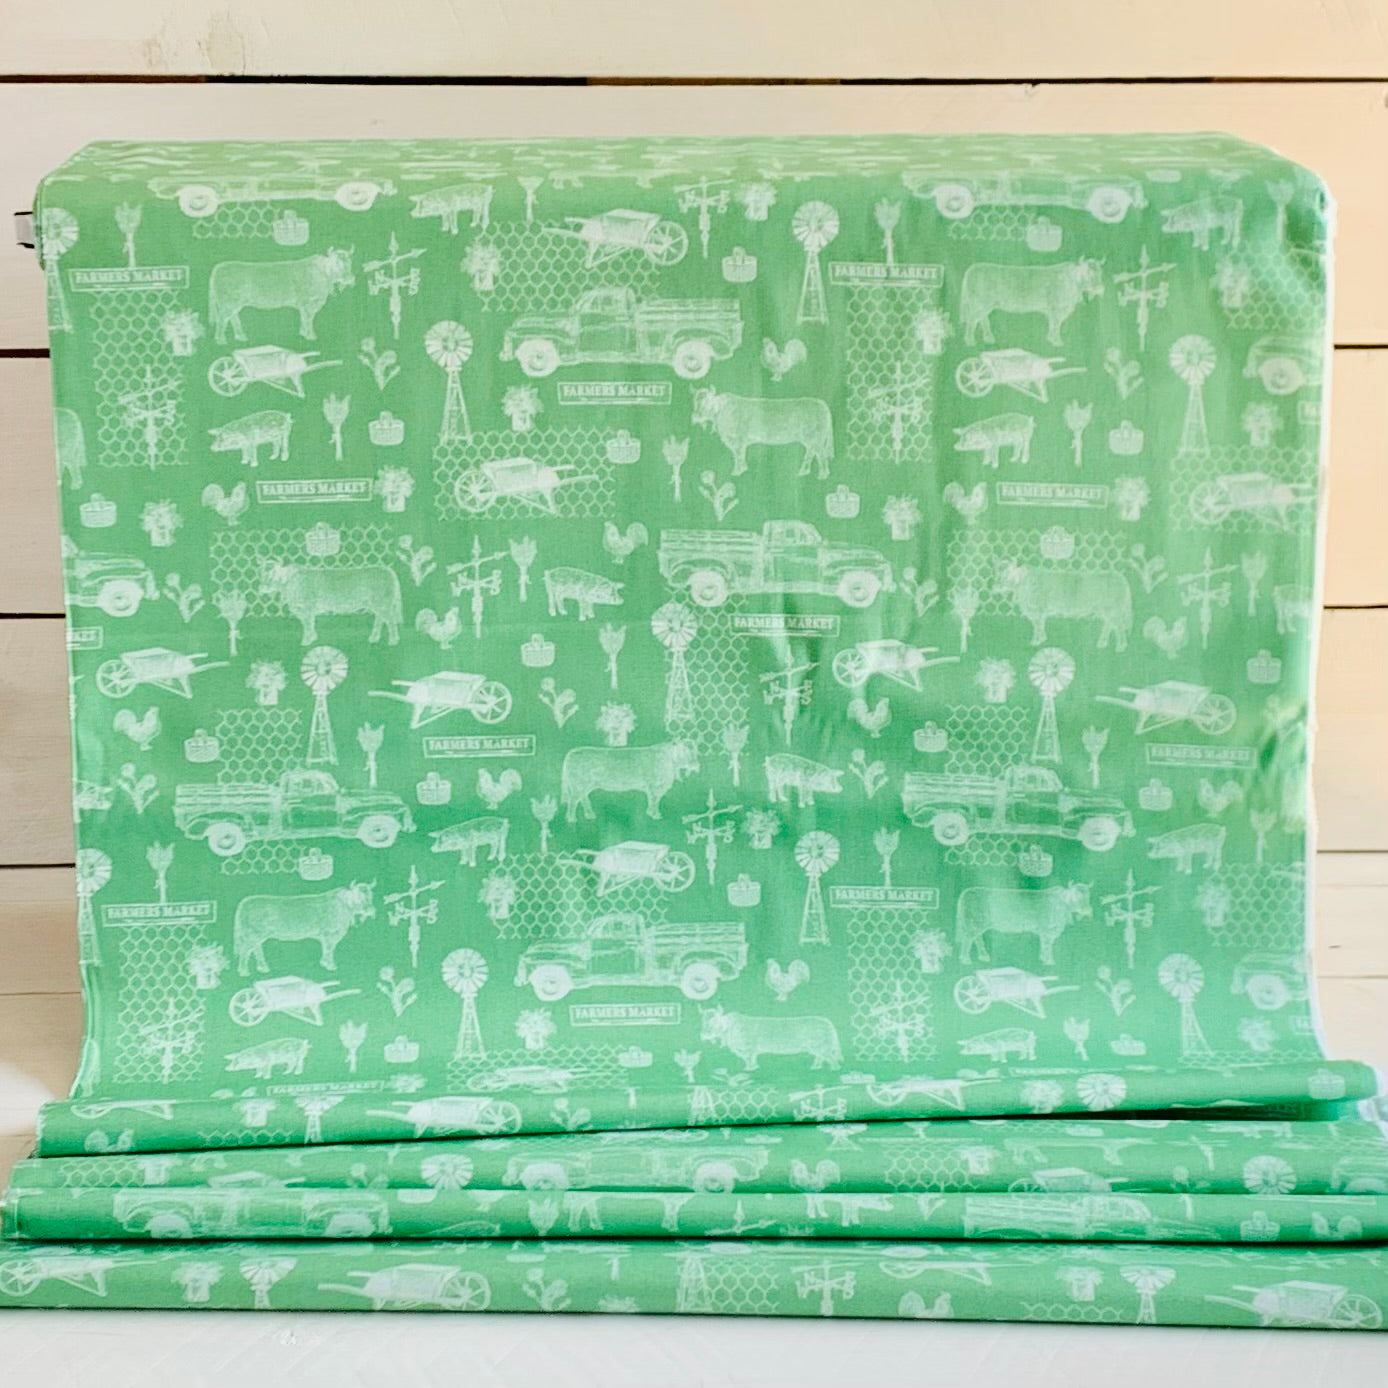 Farm Toile From Farmers Market Collection by Whistler Studios and Milled by Windham Fabrics- Green 52765-3 Cotton Fabric